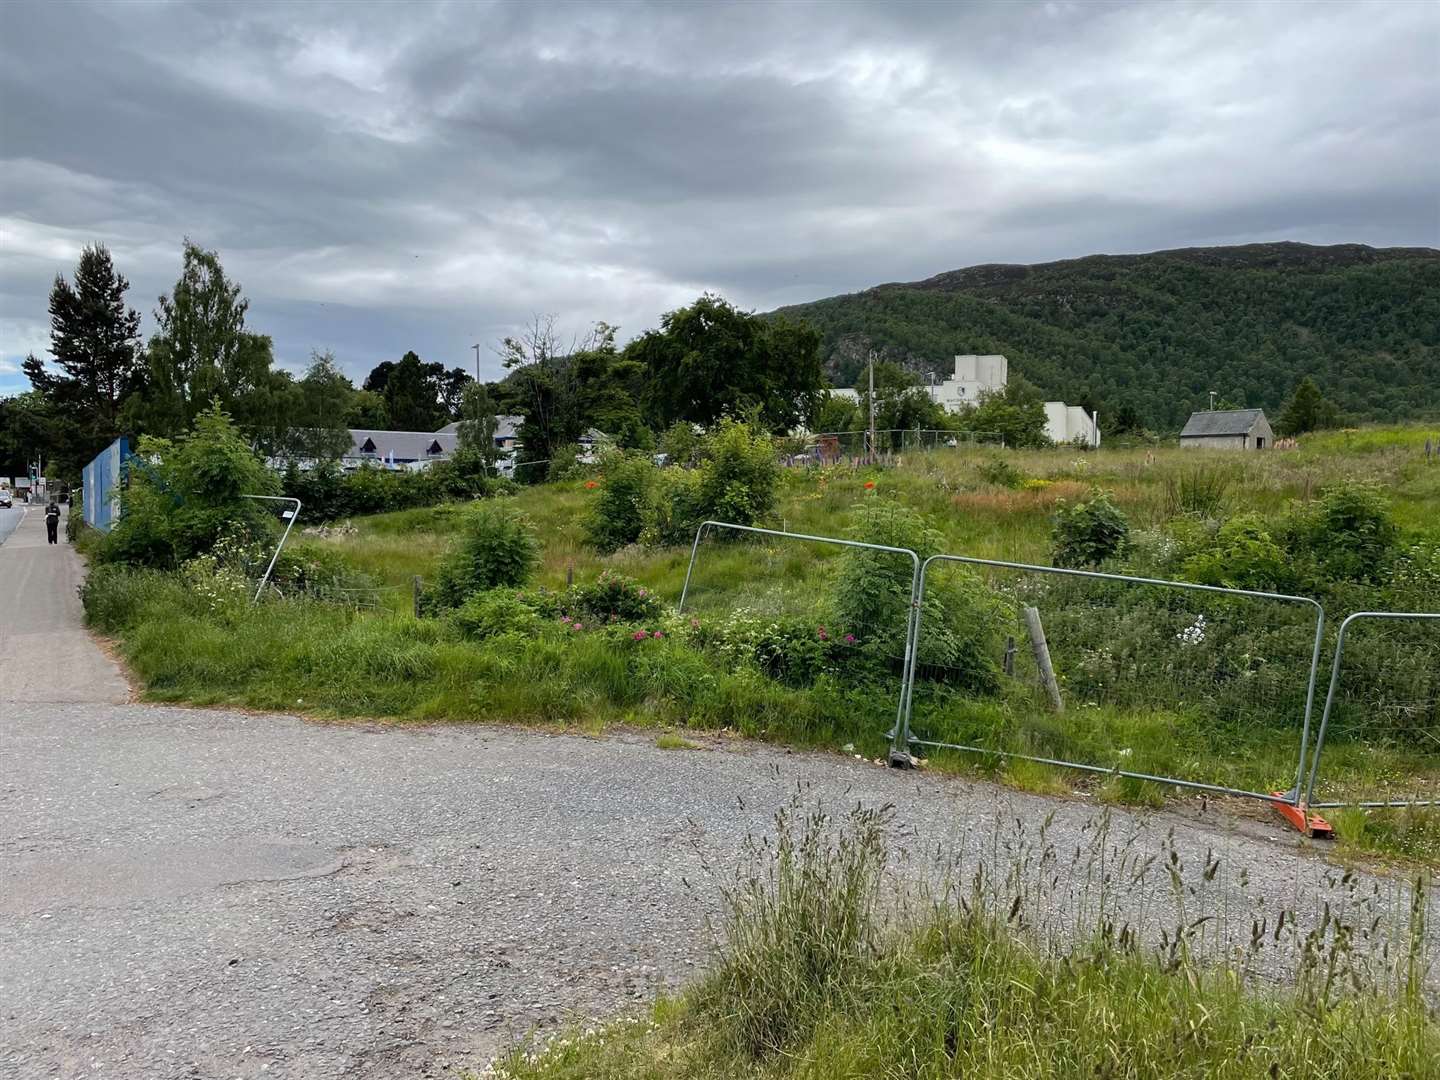 The site for the proposed development at the heart of Aviemore was rejected.